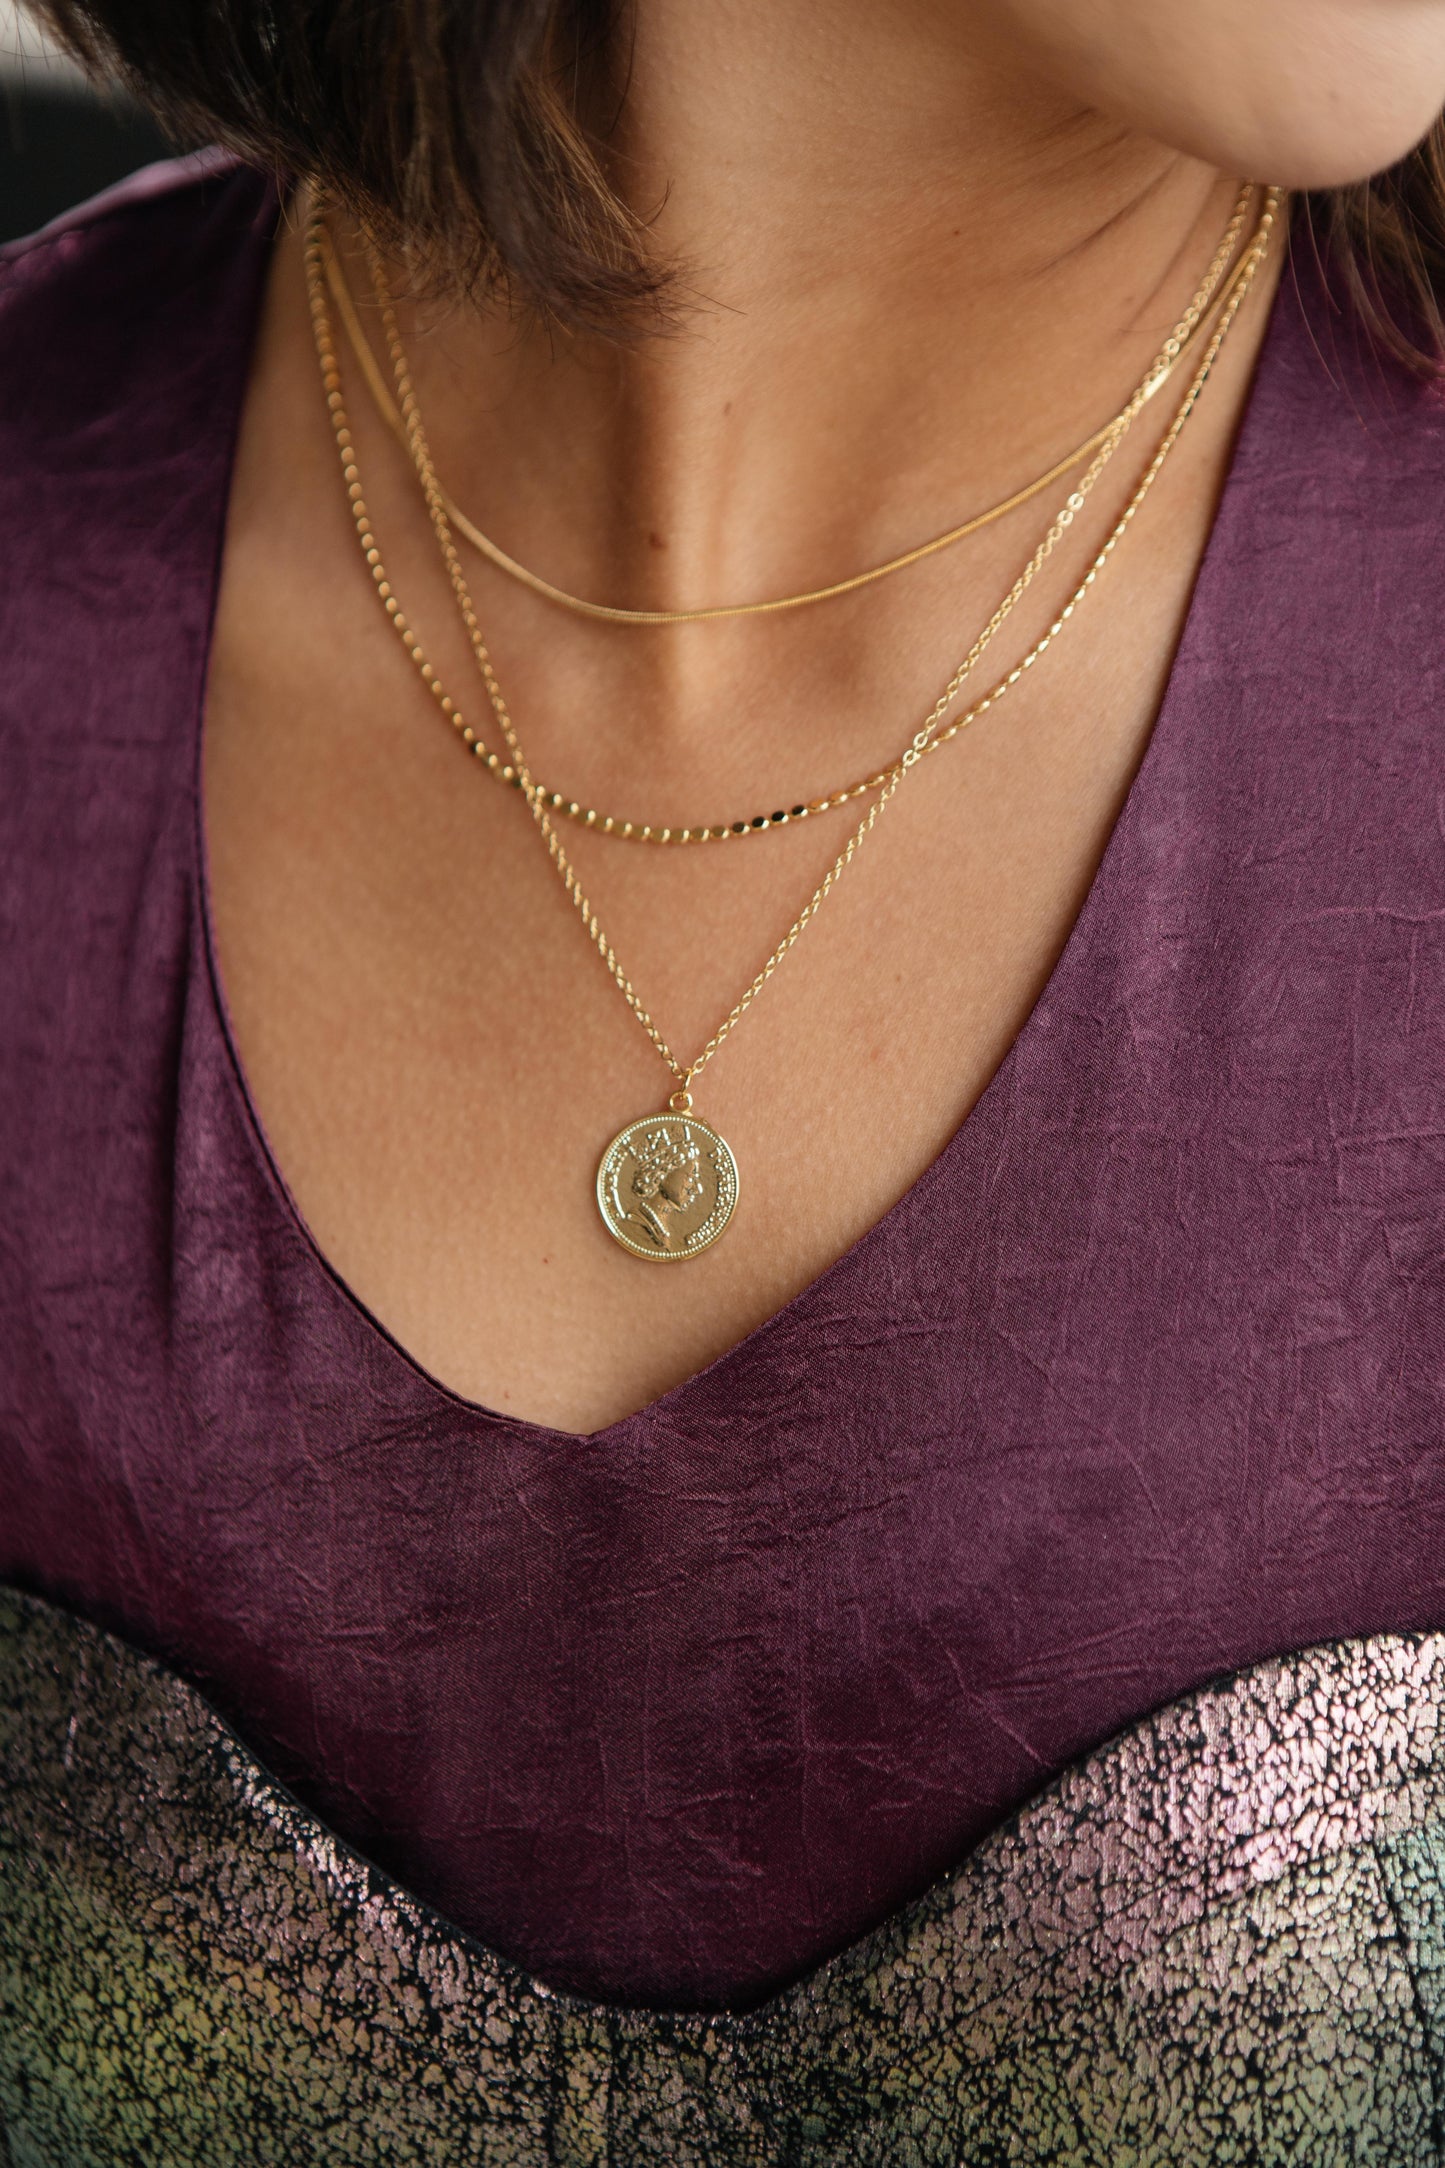 Make A Wish Coin Necklace